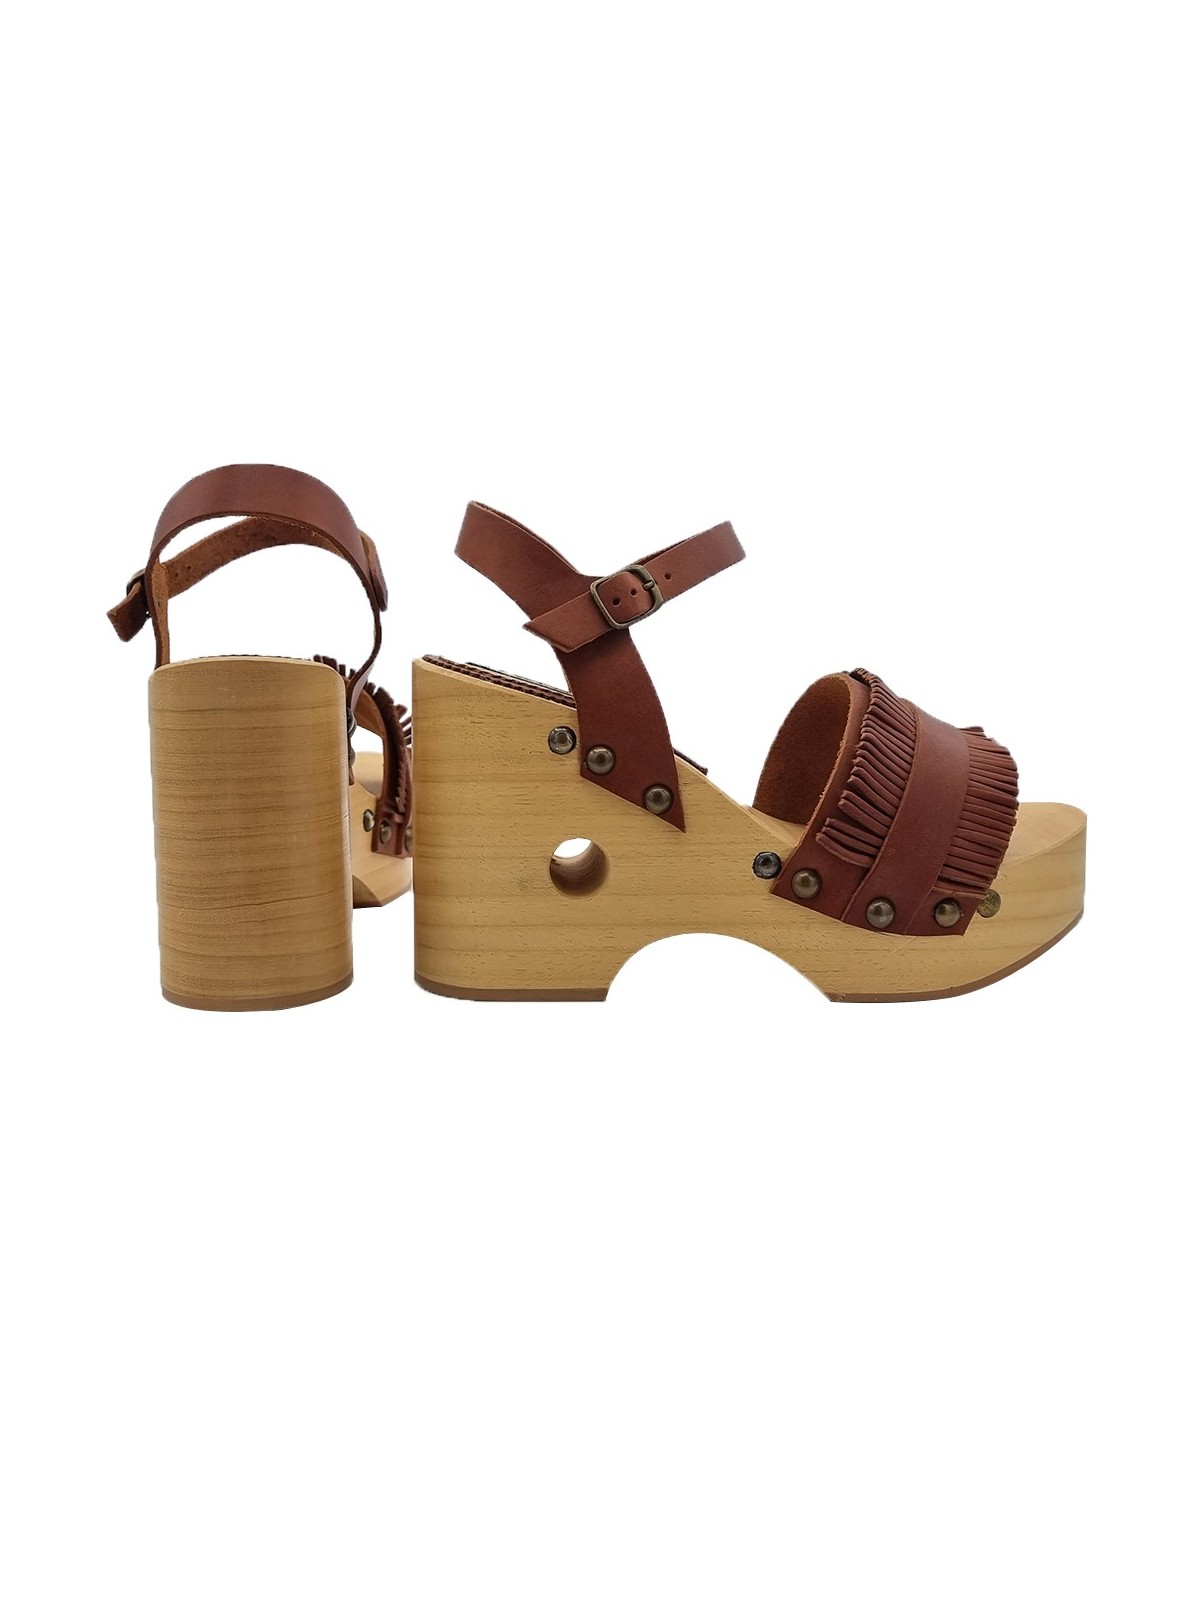 BROWN SANDALS WITH FRINGES AND 10.5 CM HEEL